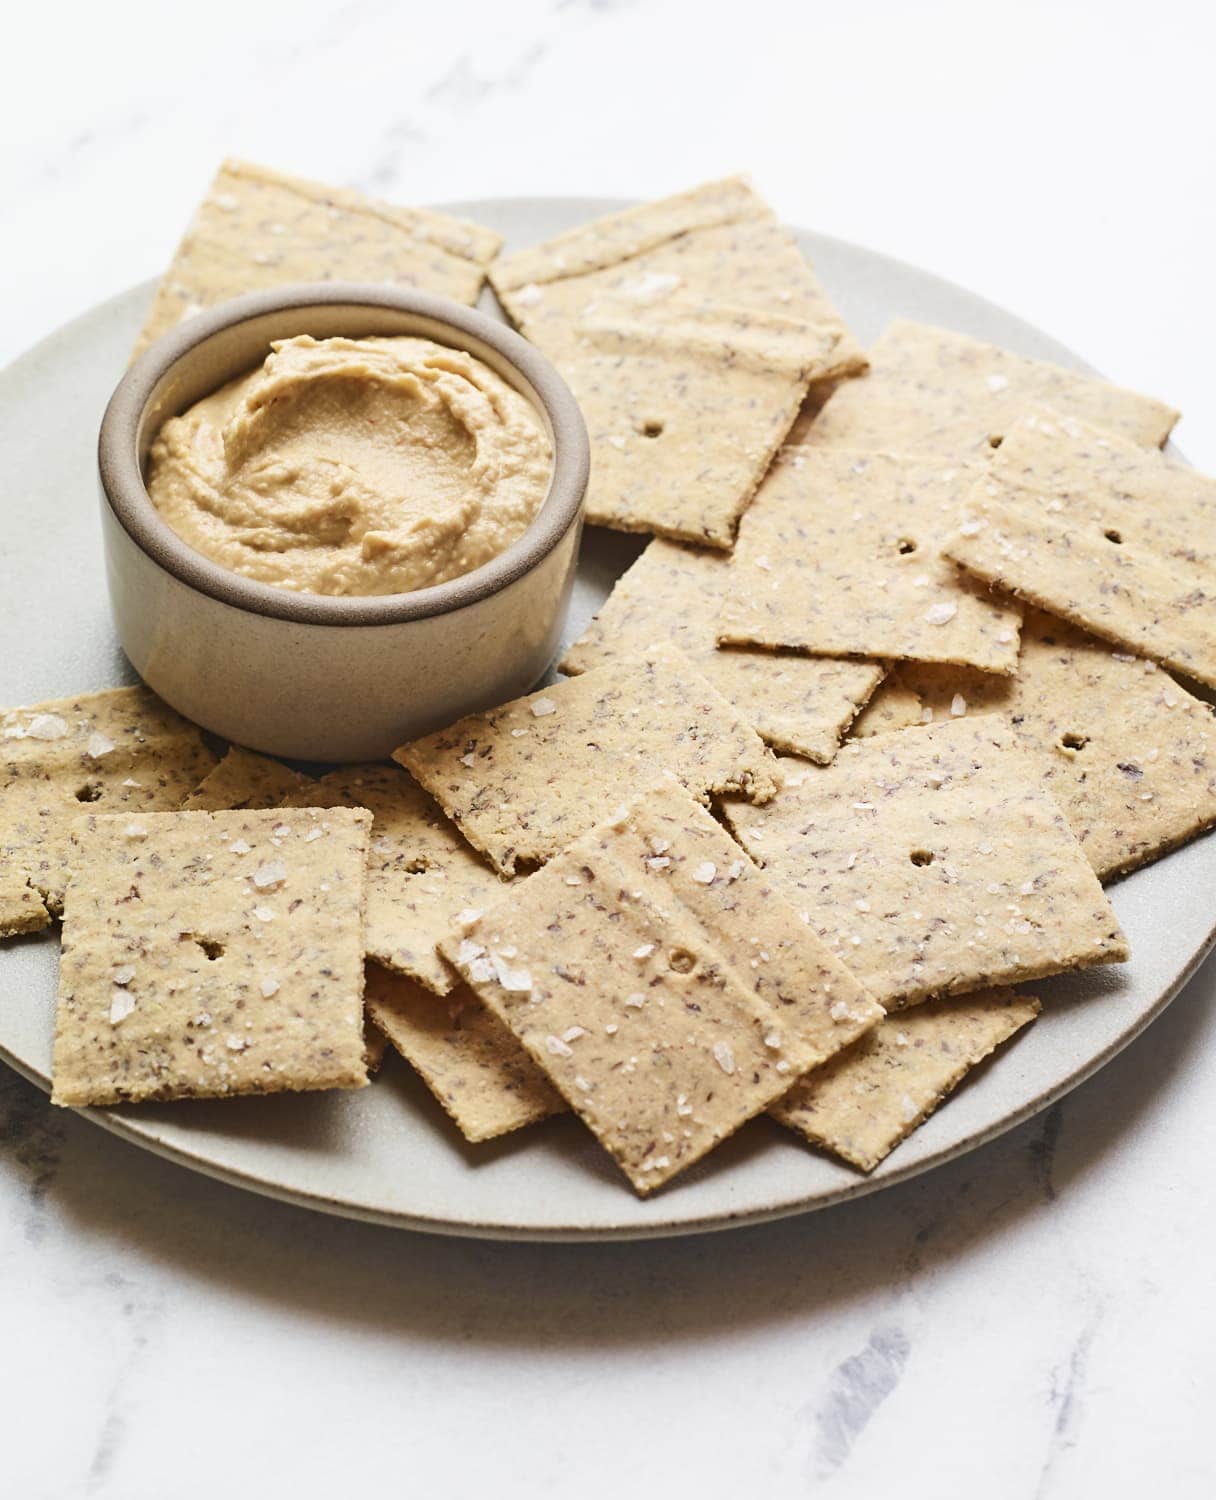 Almond flour crackers on a plate with hummus.